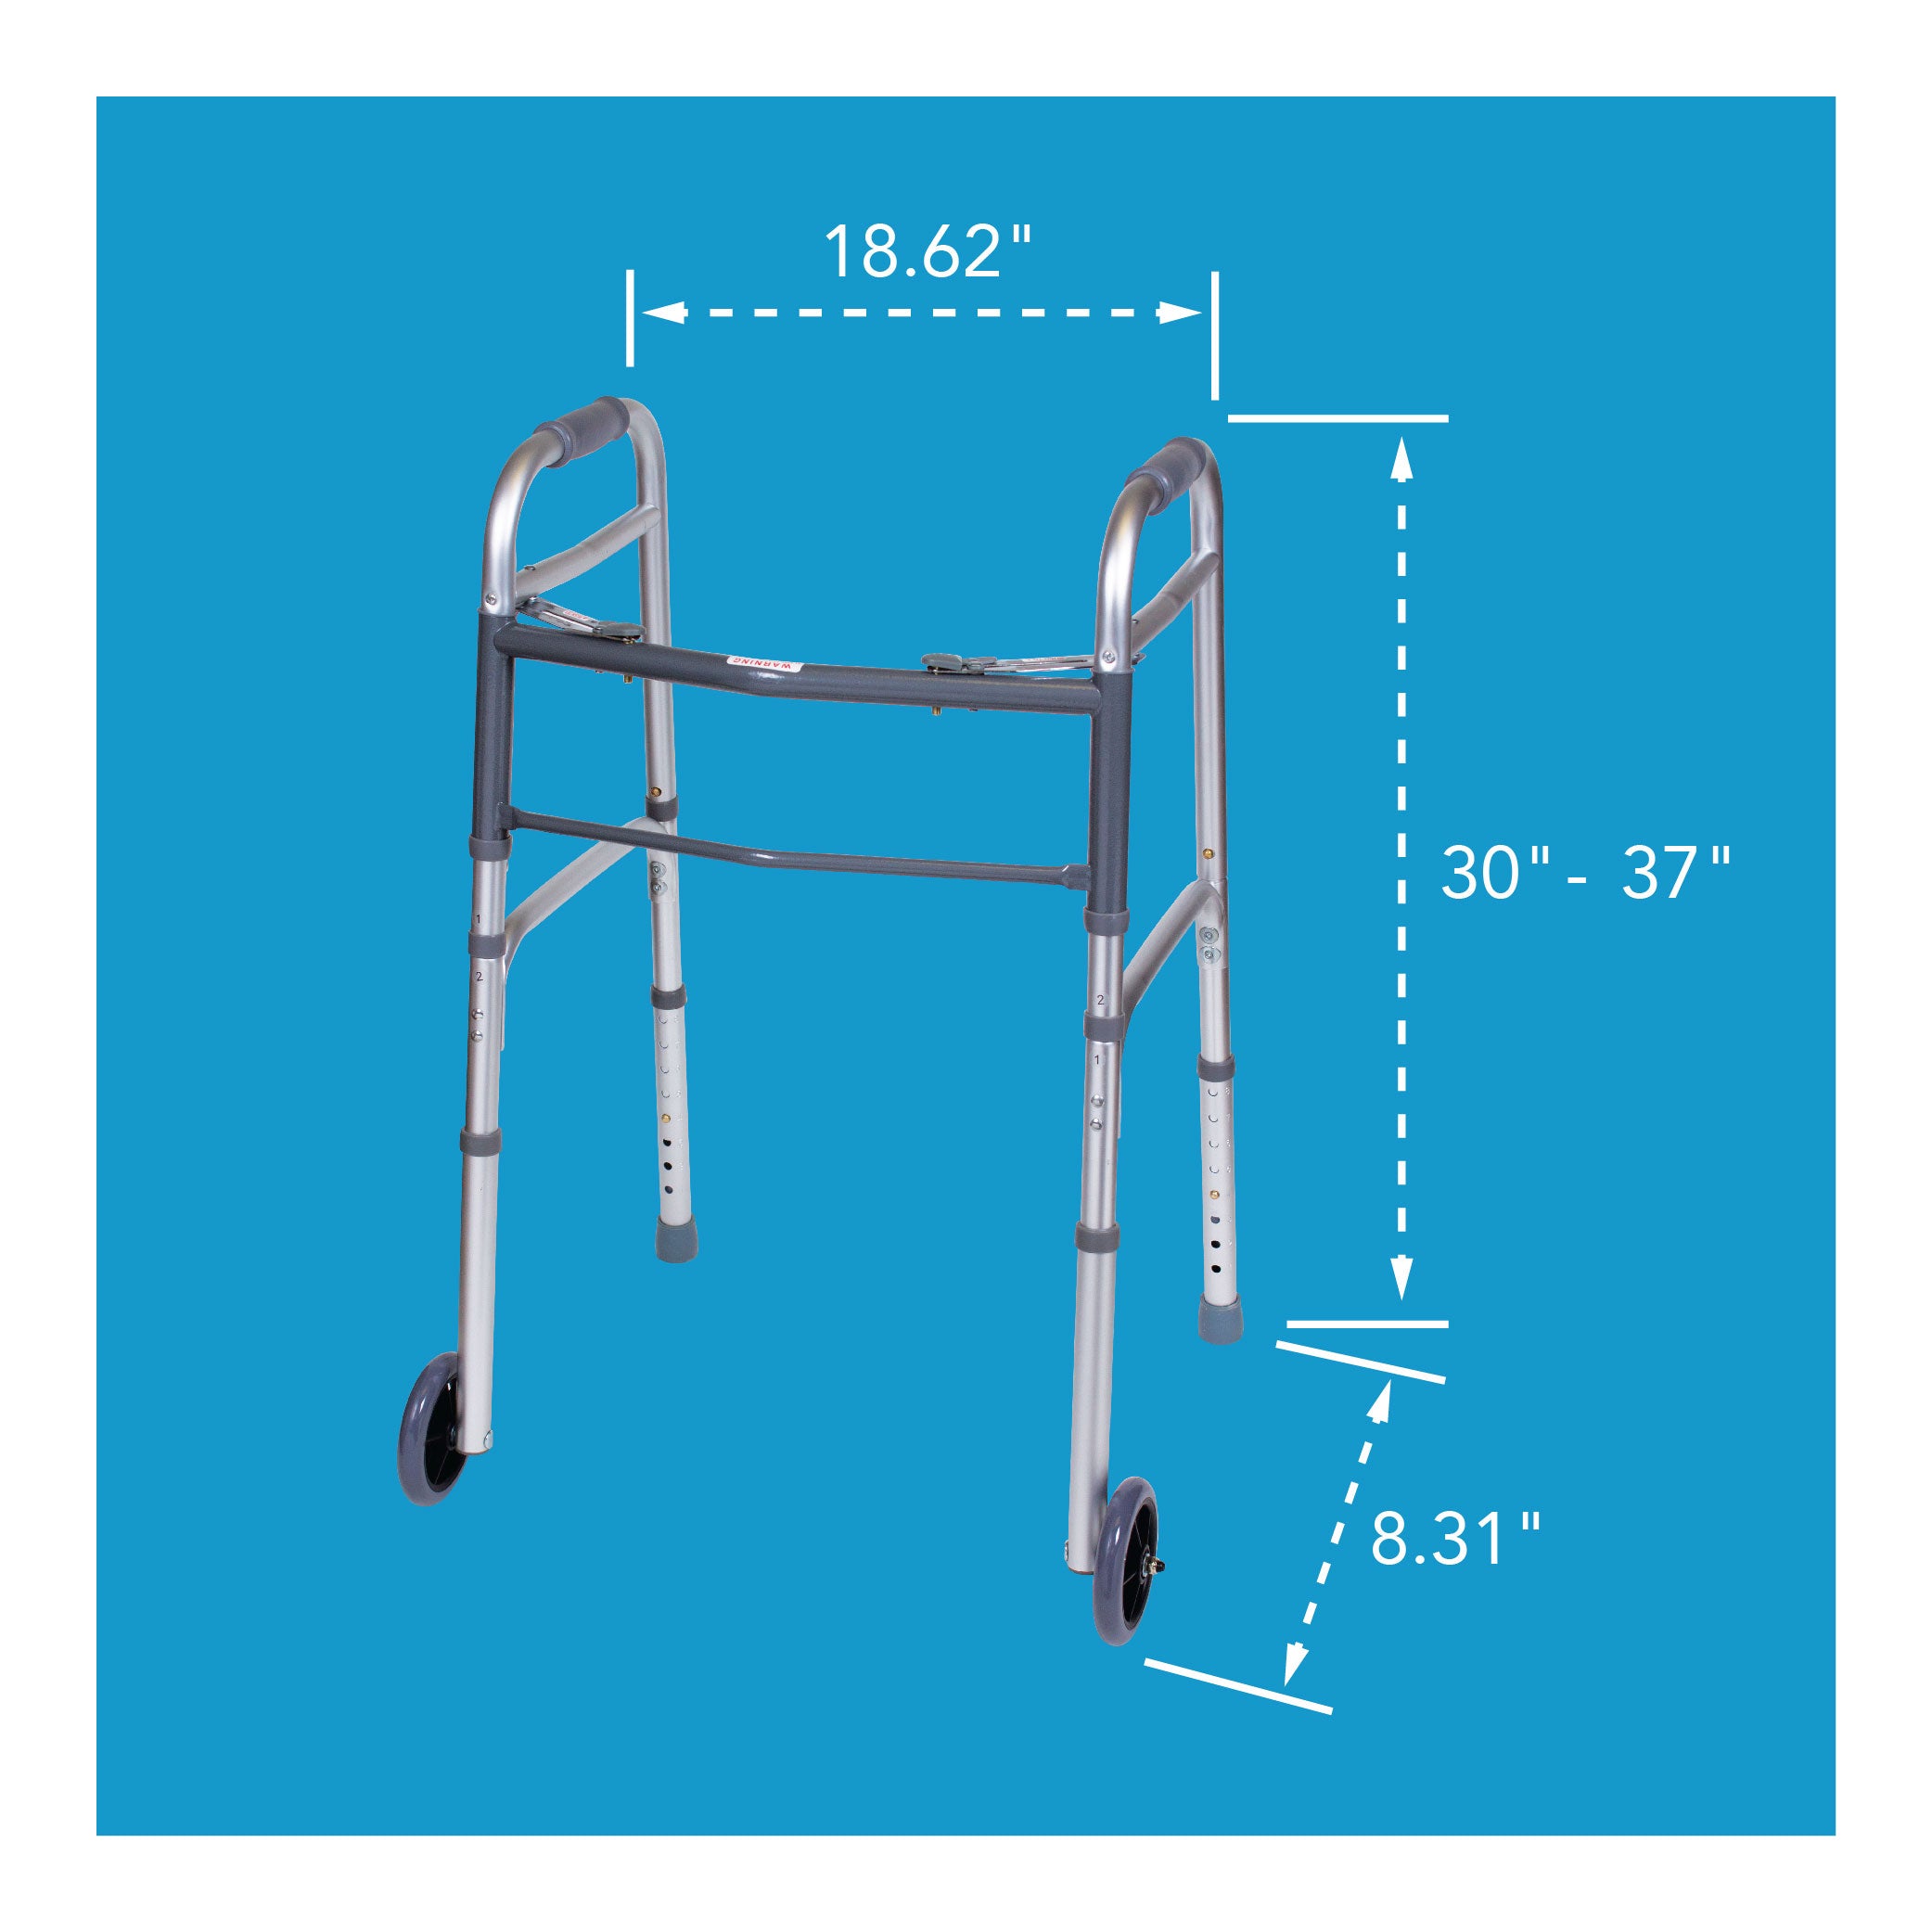 Folding walker with wheels and dimensions outlined. 30-37